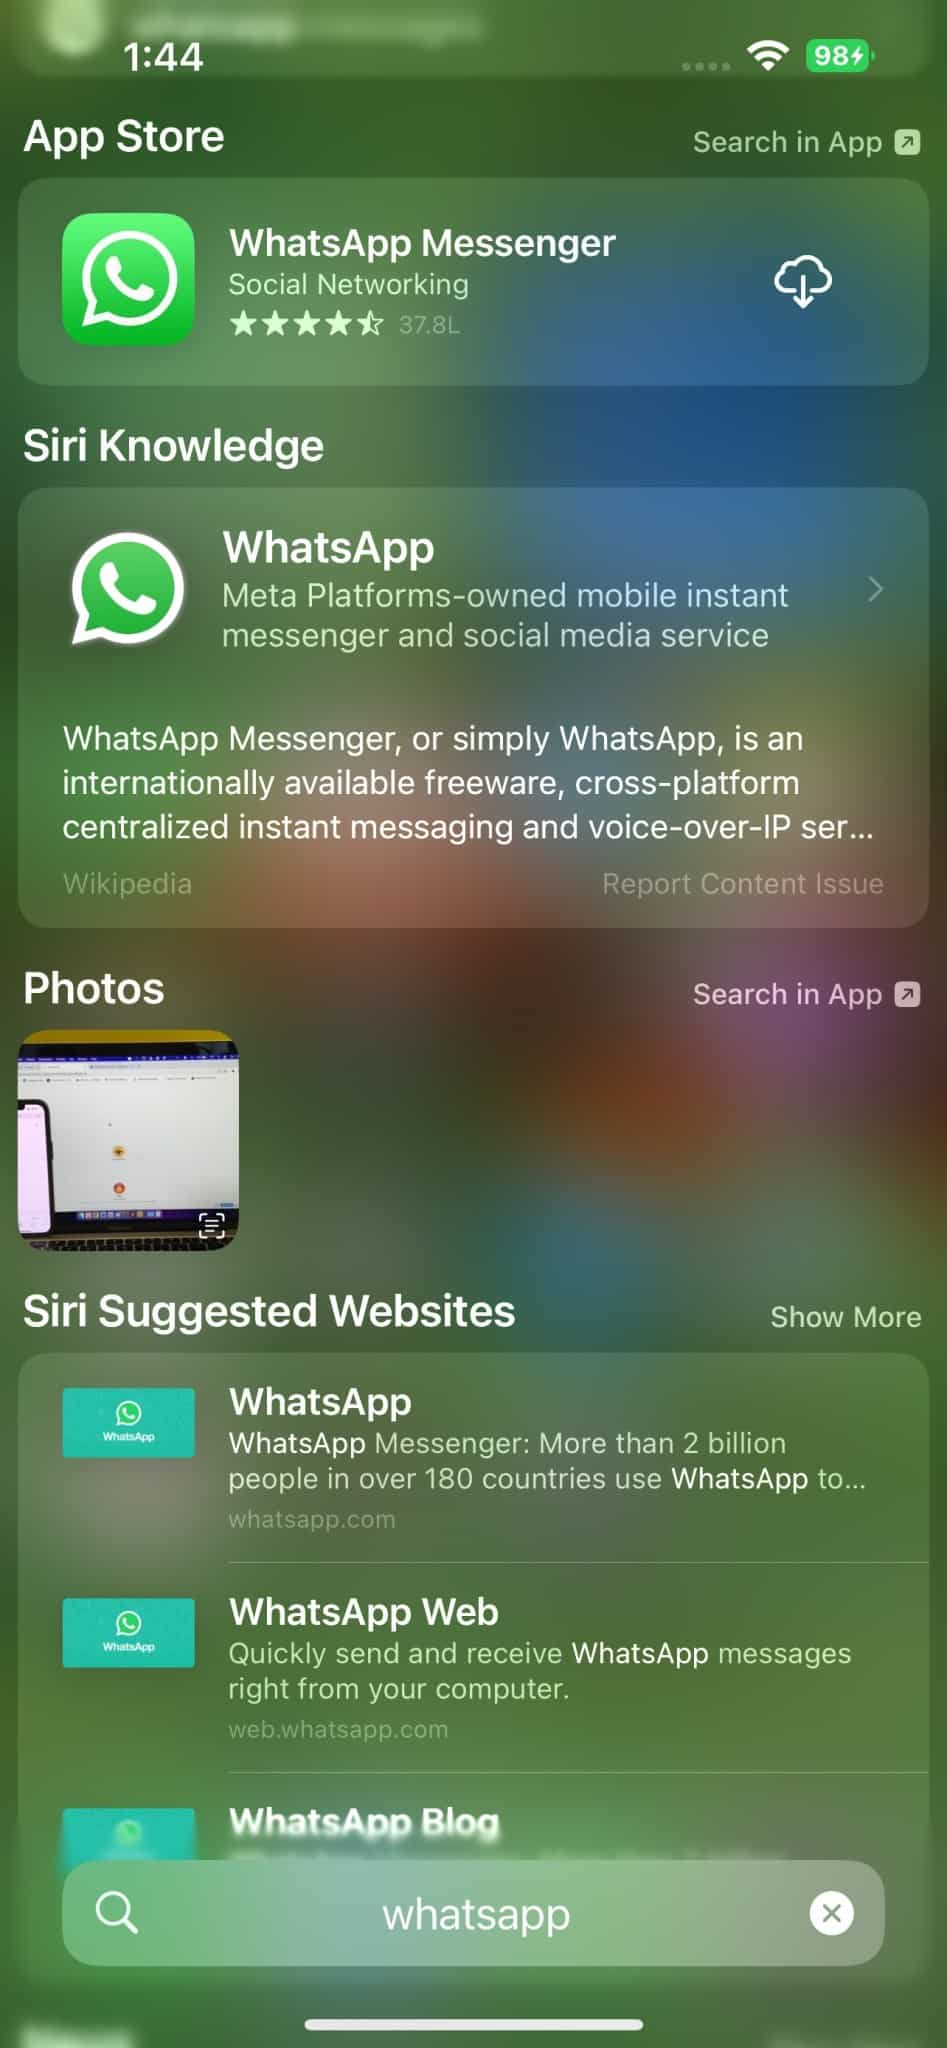 Installing an app from Spotlight search on an iPhone